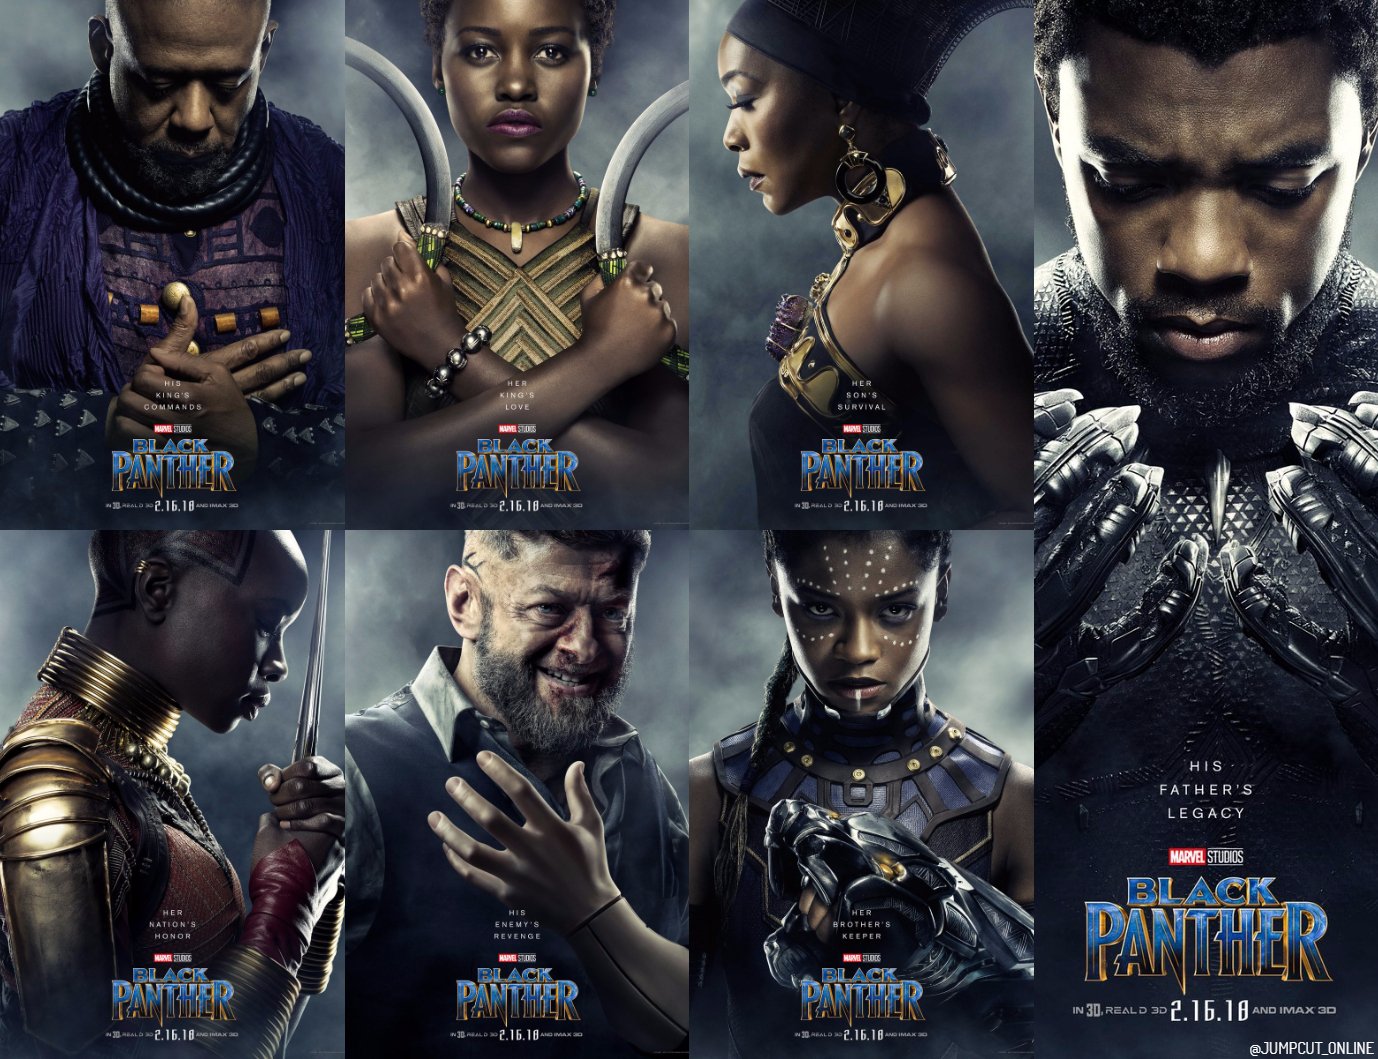 Black Panther - wide 11